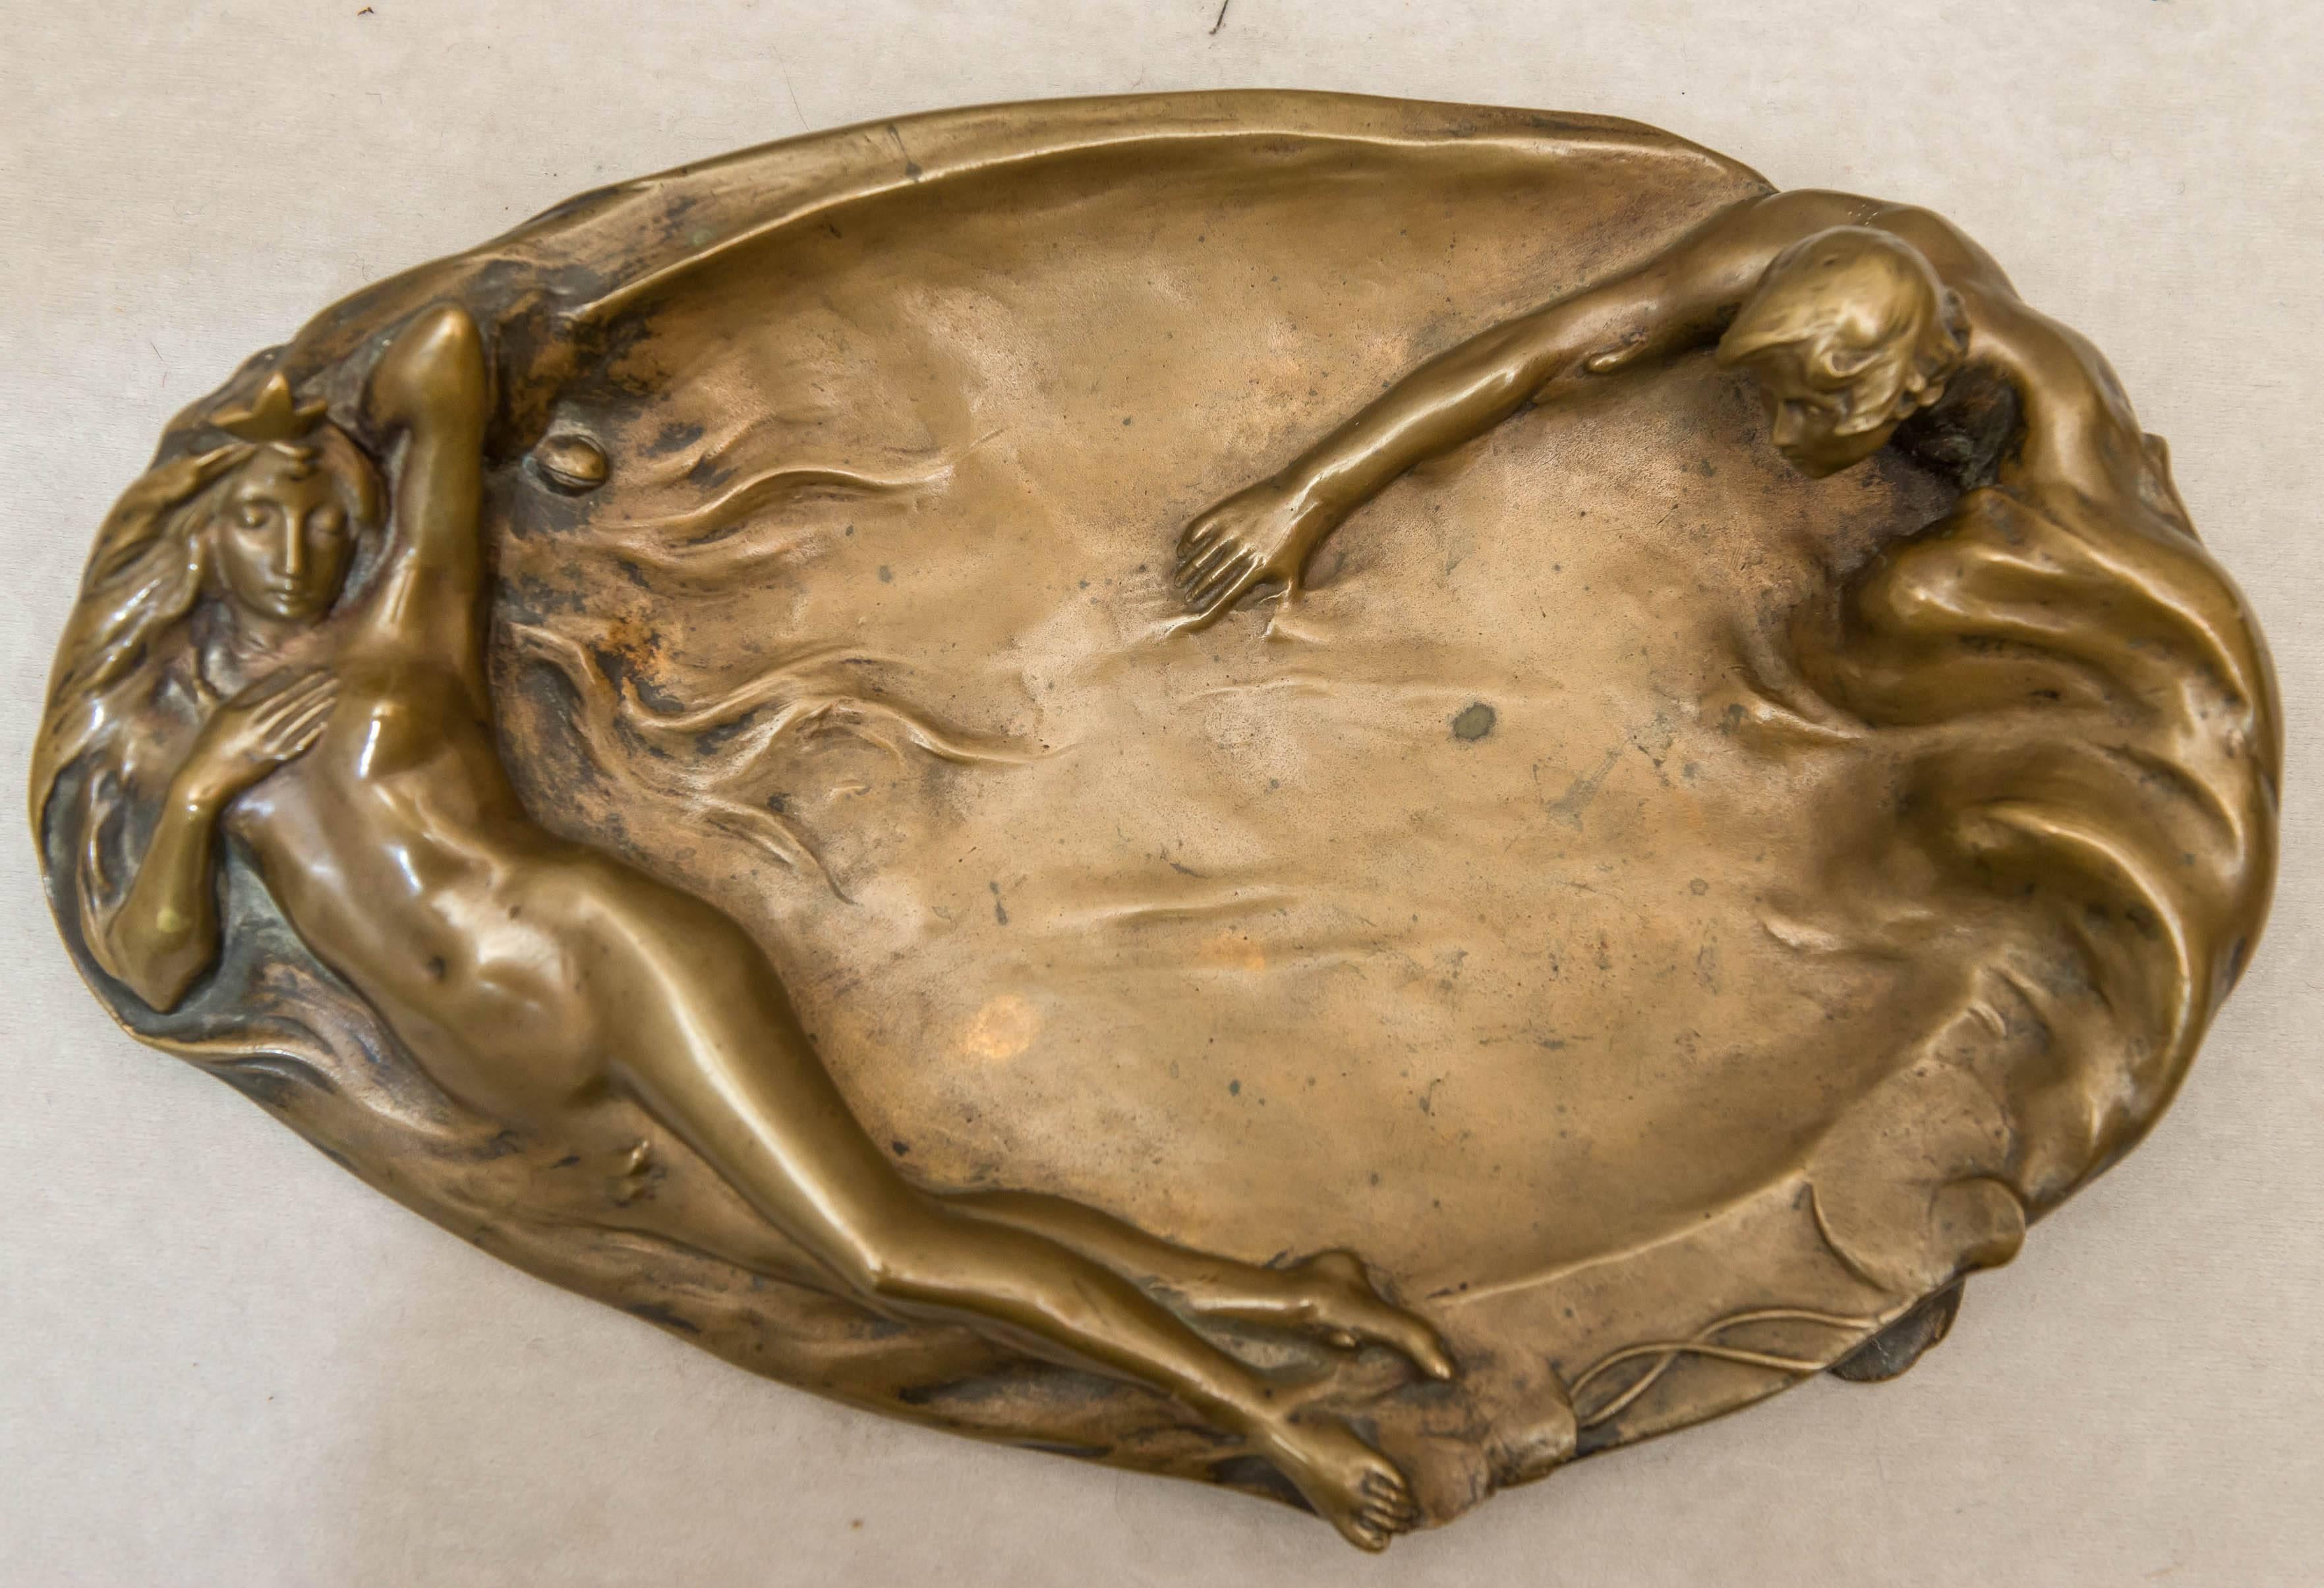 This alluring and sexy tray, also known as a vide poche is artist signed S. Richter. Richter was Austrian and produced many fine bronze sculptures. The poor fellow is desperately trying to swim towards the nude maiden. A beautiful, whimsical and